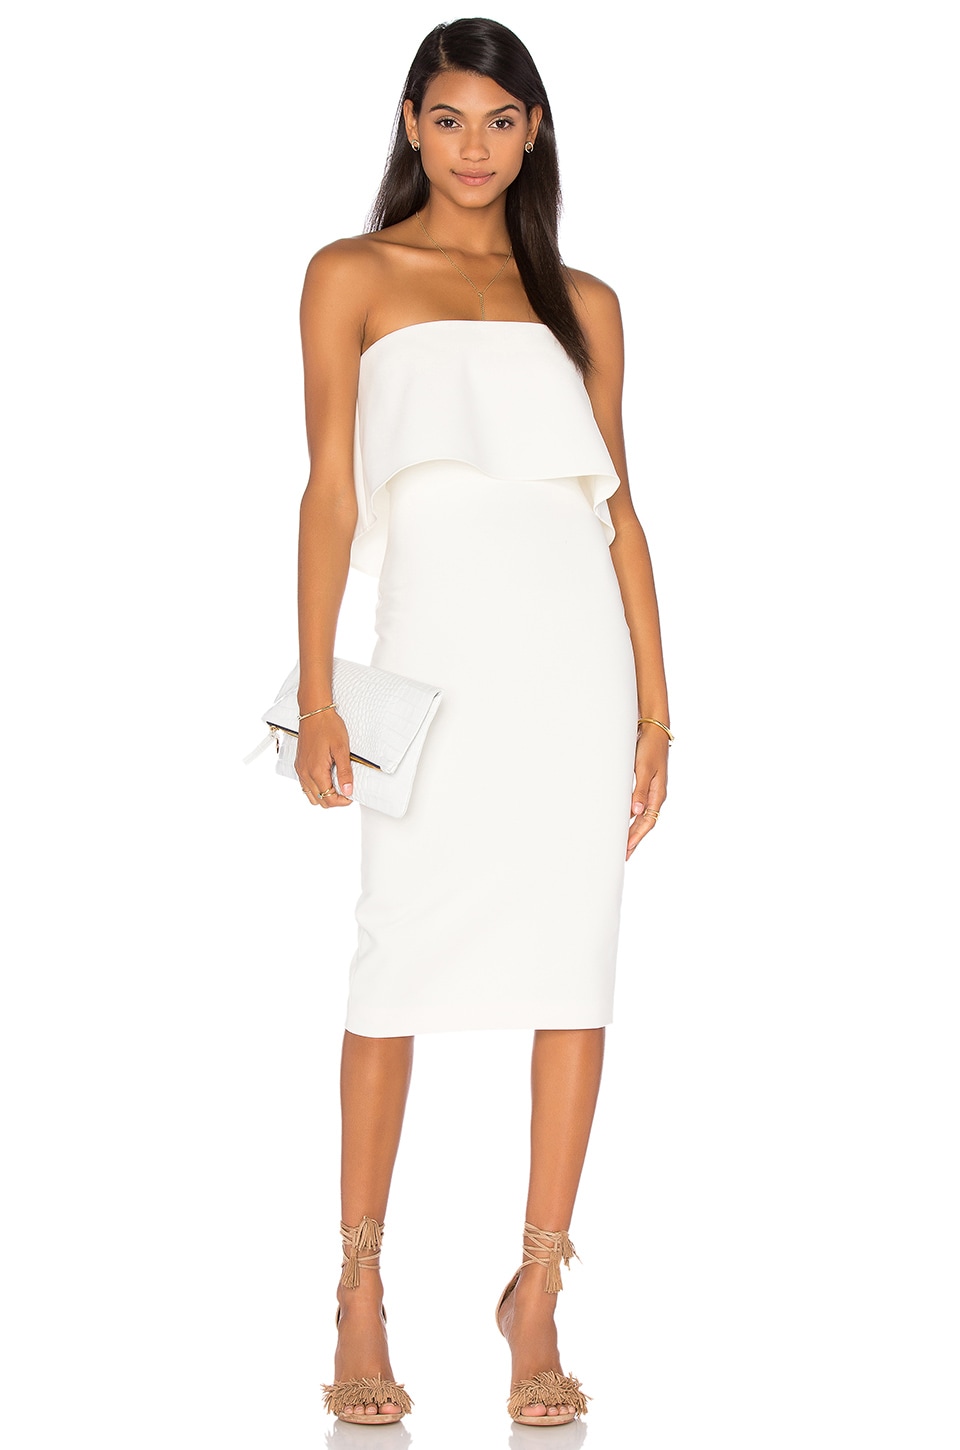 LIKELY Driggs Dress in White | REVOLVE